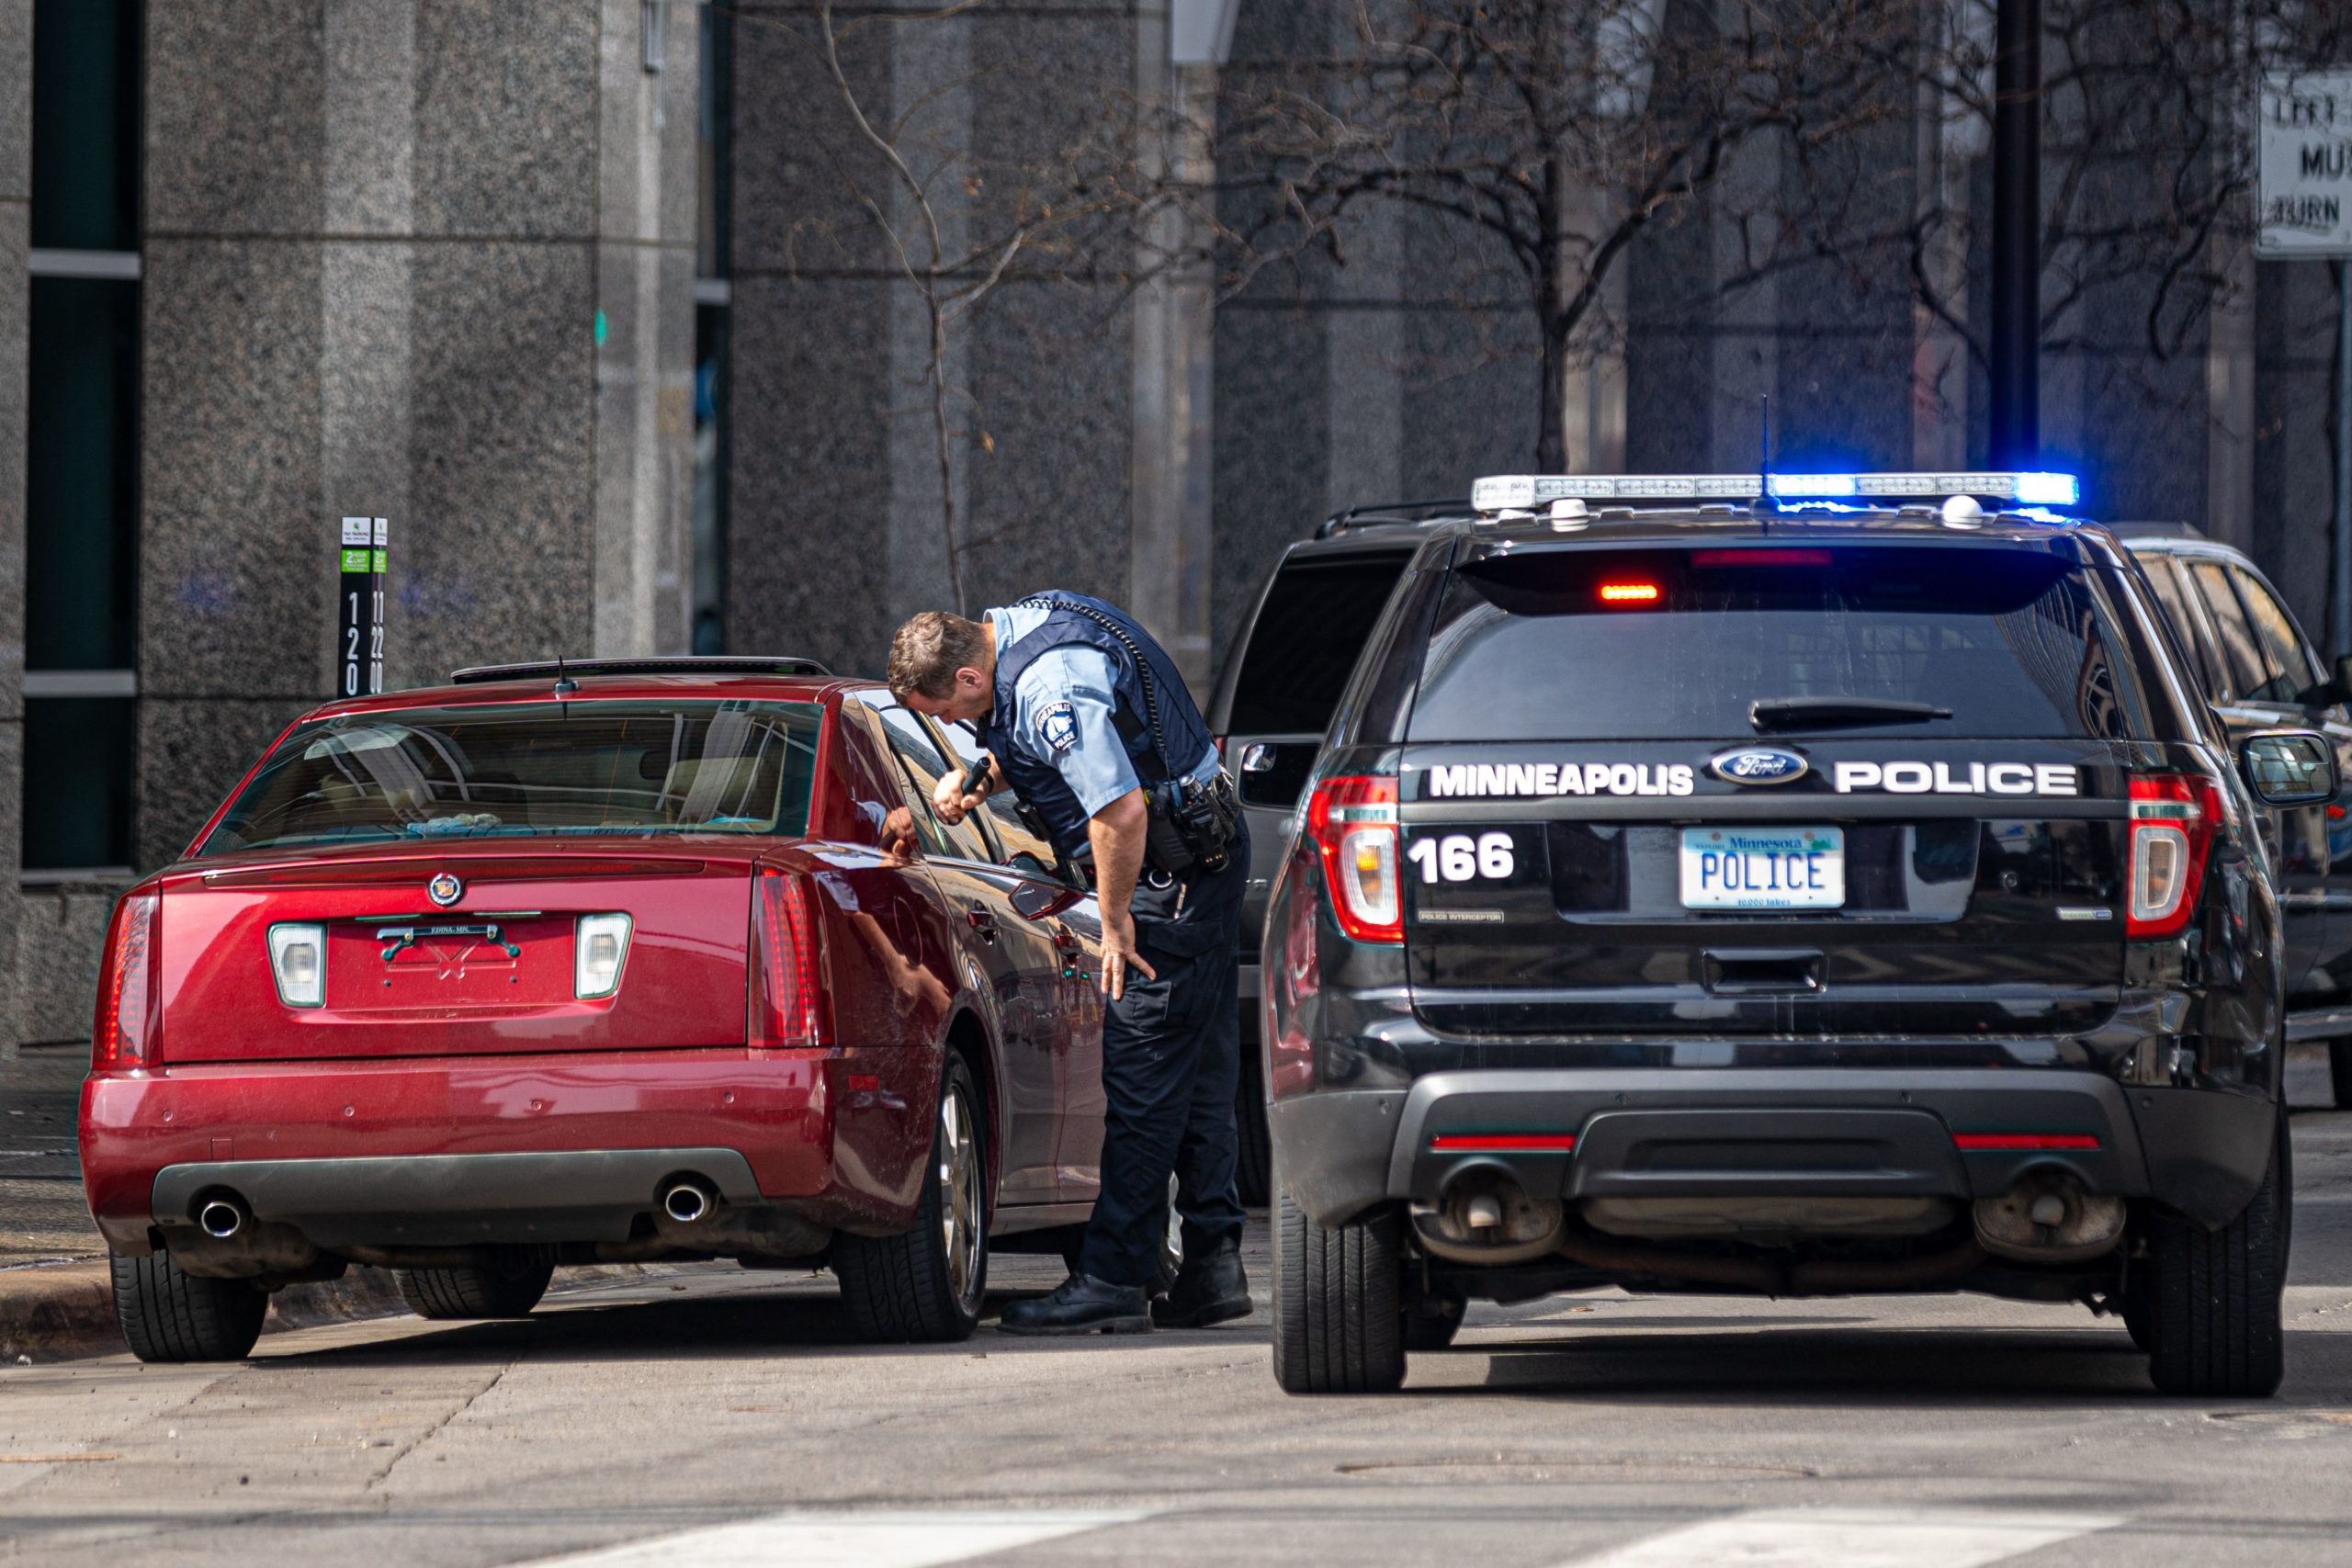 A Minneapolis Police officer checks a suspicious car without a plate parked near the Hennepin County Government Center as the jury selection begins at the trial of former police officer Derek Chauvin in Minneapolis, Minnesota on March 9, 2021. - Jury selection finally got underway on March 9 in the high-profile trial of former Minneapolis Police Department officer Derek Chauvin accused of killing George Floyd, a Black man whose death laid bare racial wounds in the United States and sparked protests across the globe. (Photo by Kerem Yucel / AFP) (Photo by KEREM YUCEL/AFP via Getty Images)